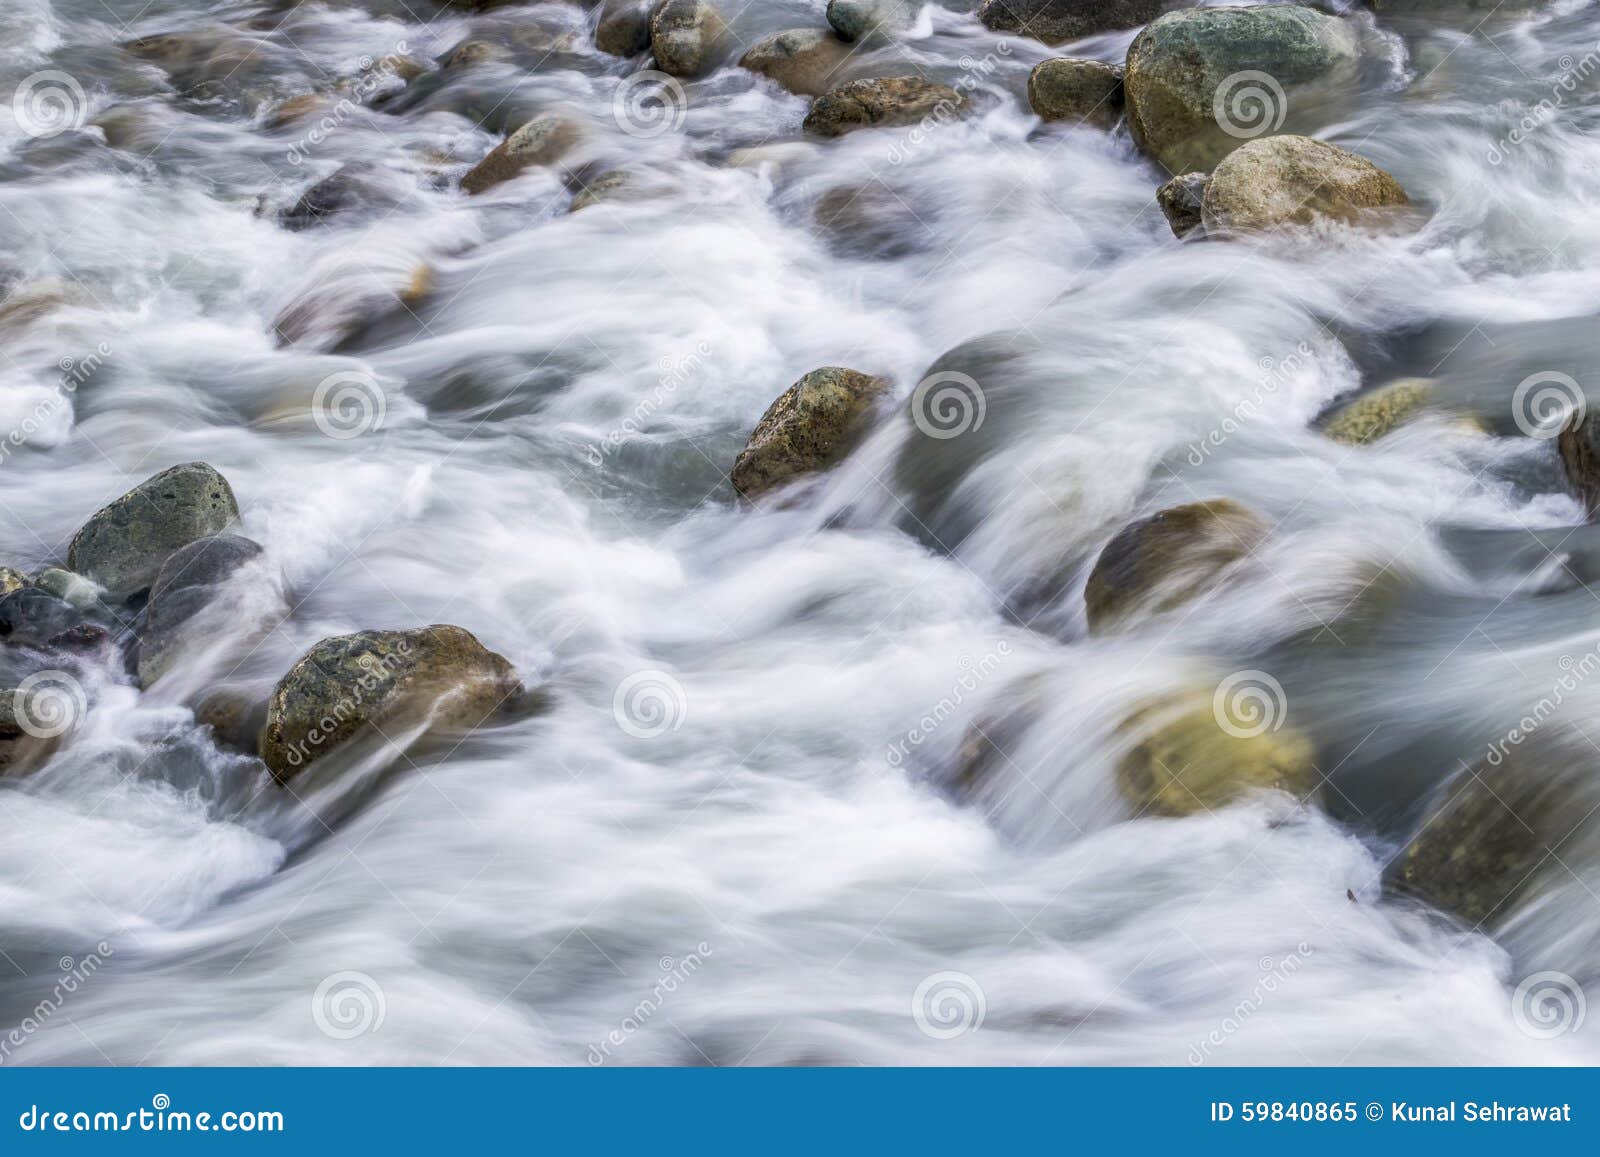 white silky water flowing downstream over the rocks and boulders